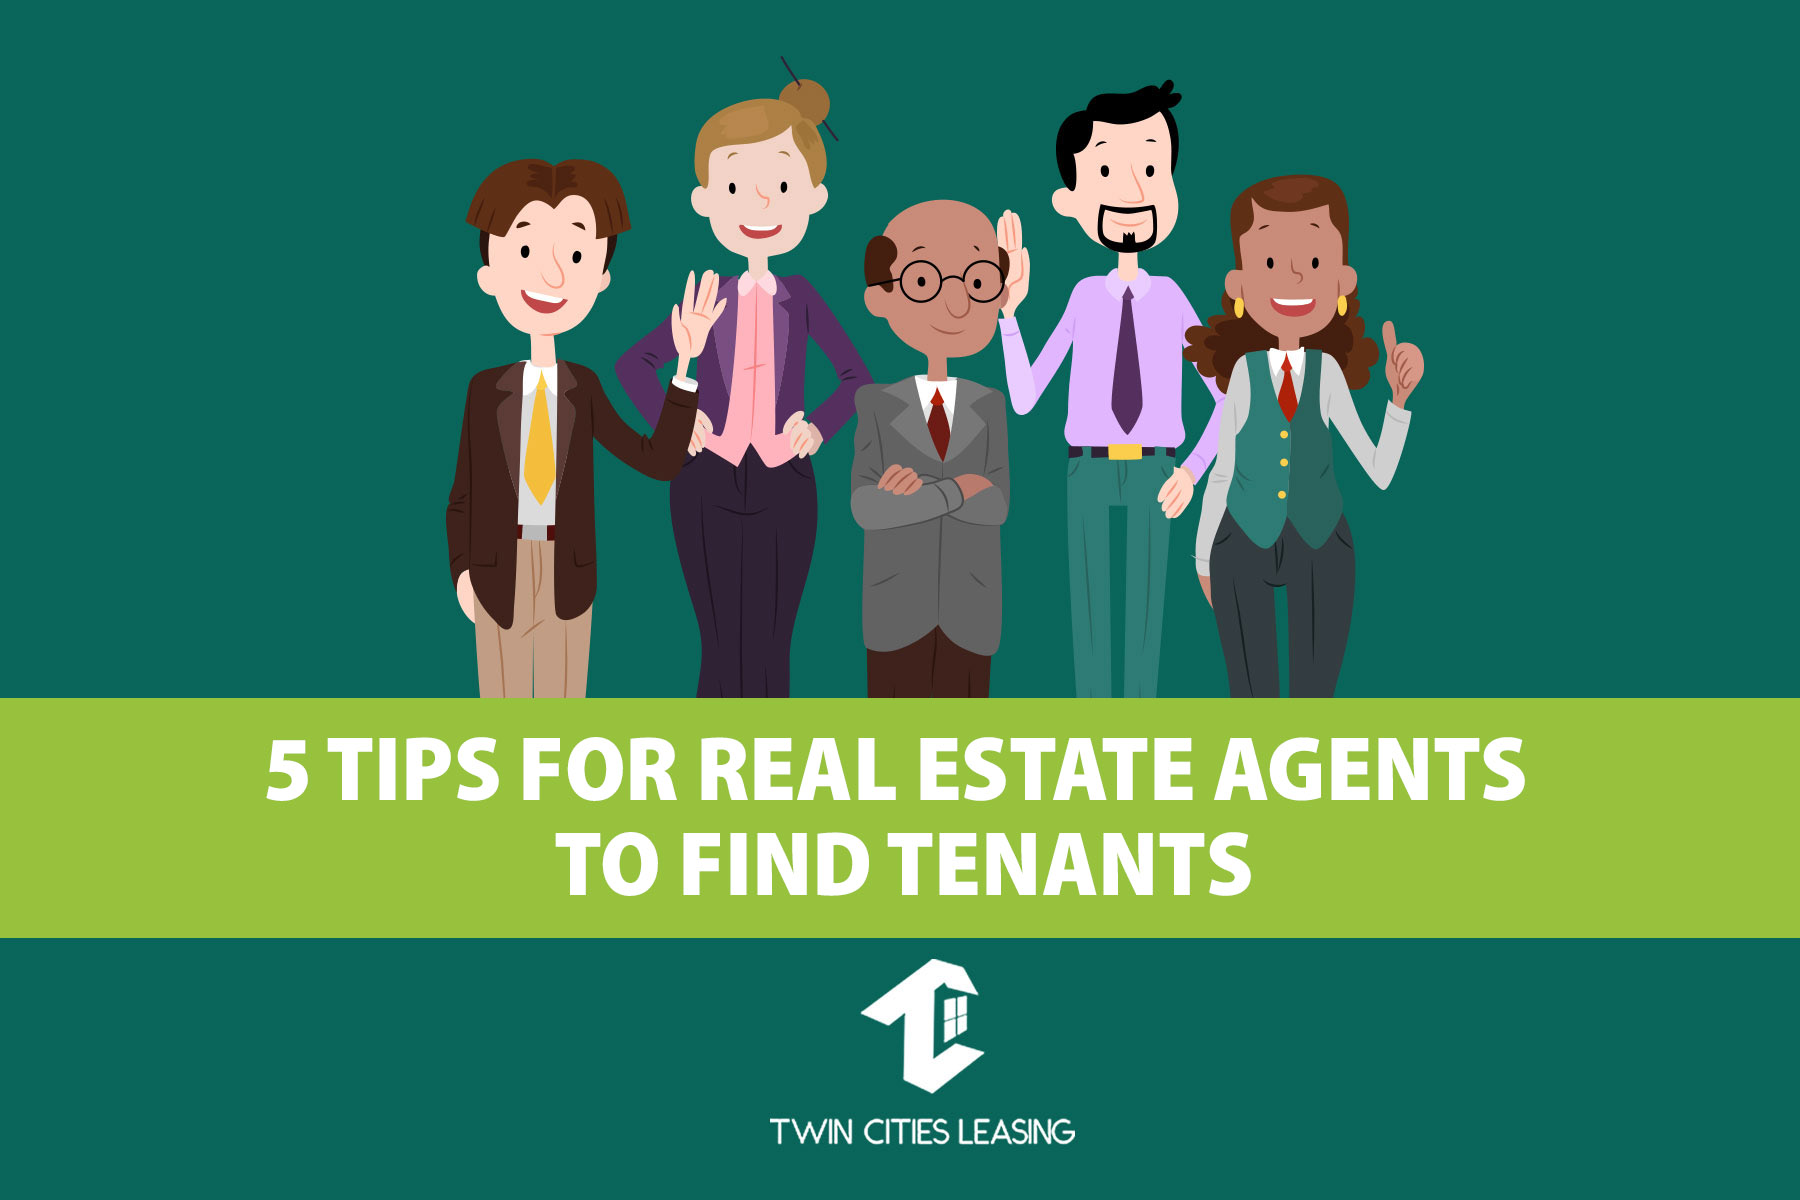 5 Tips to Find Tenants in Minnesota